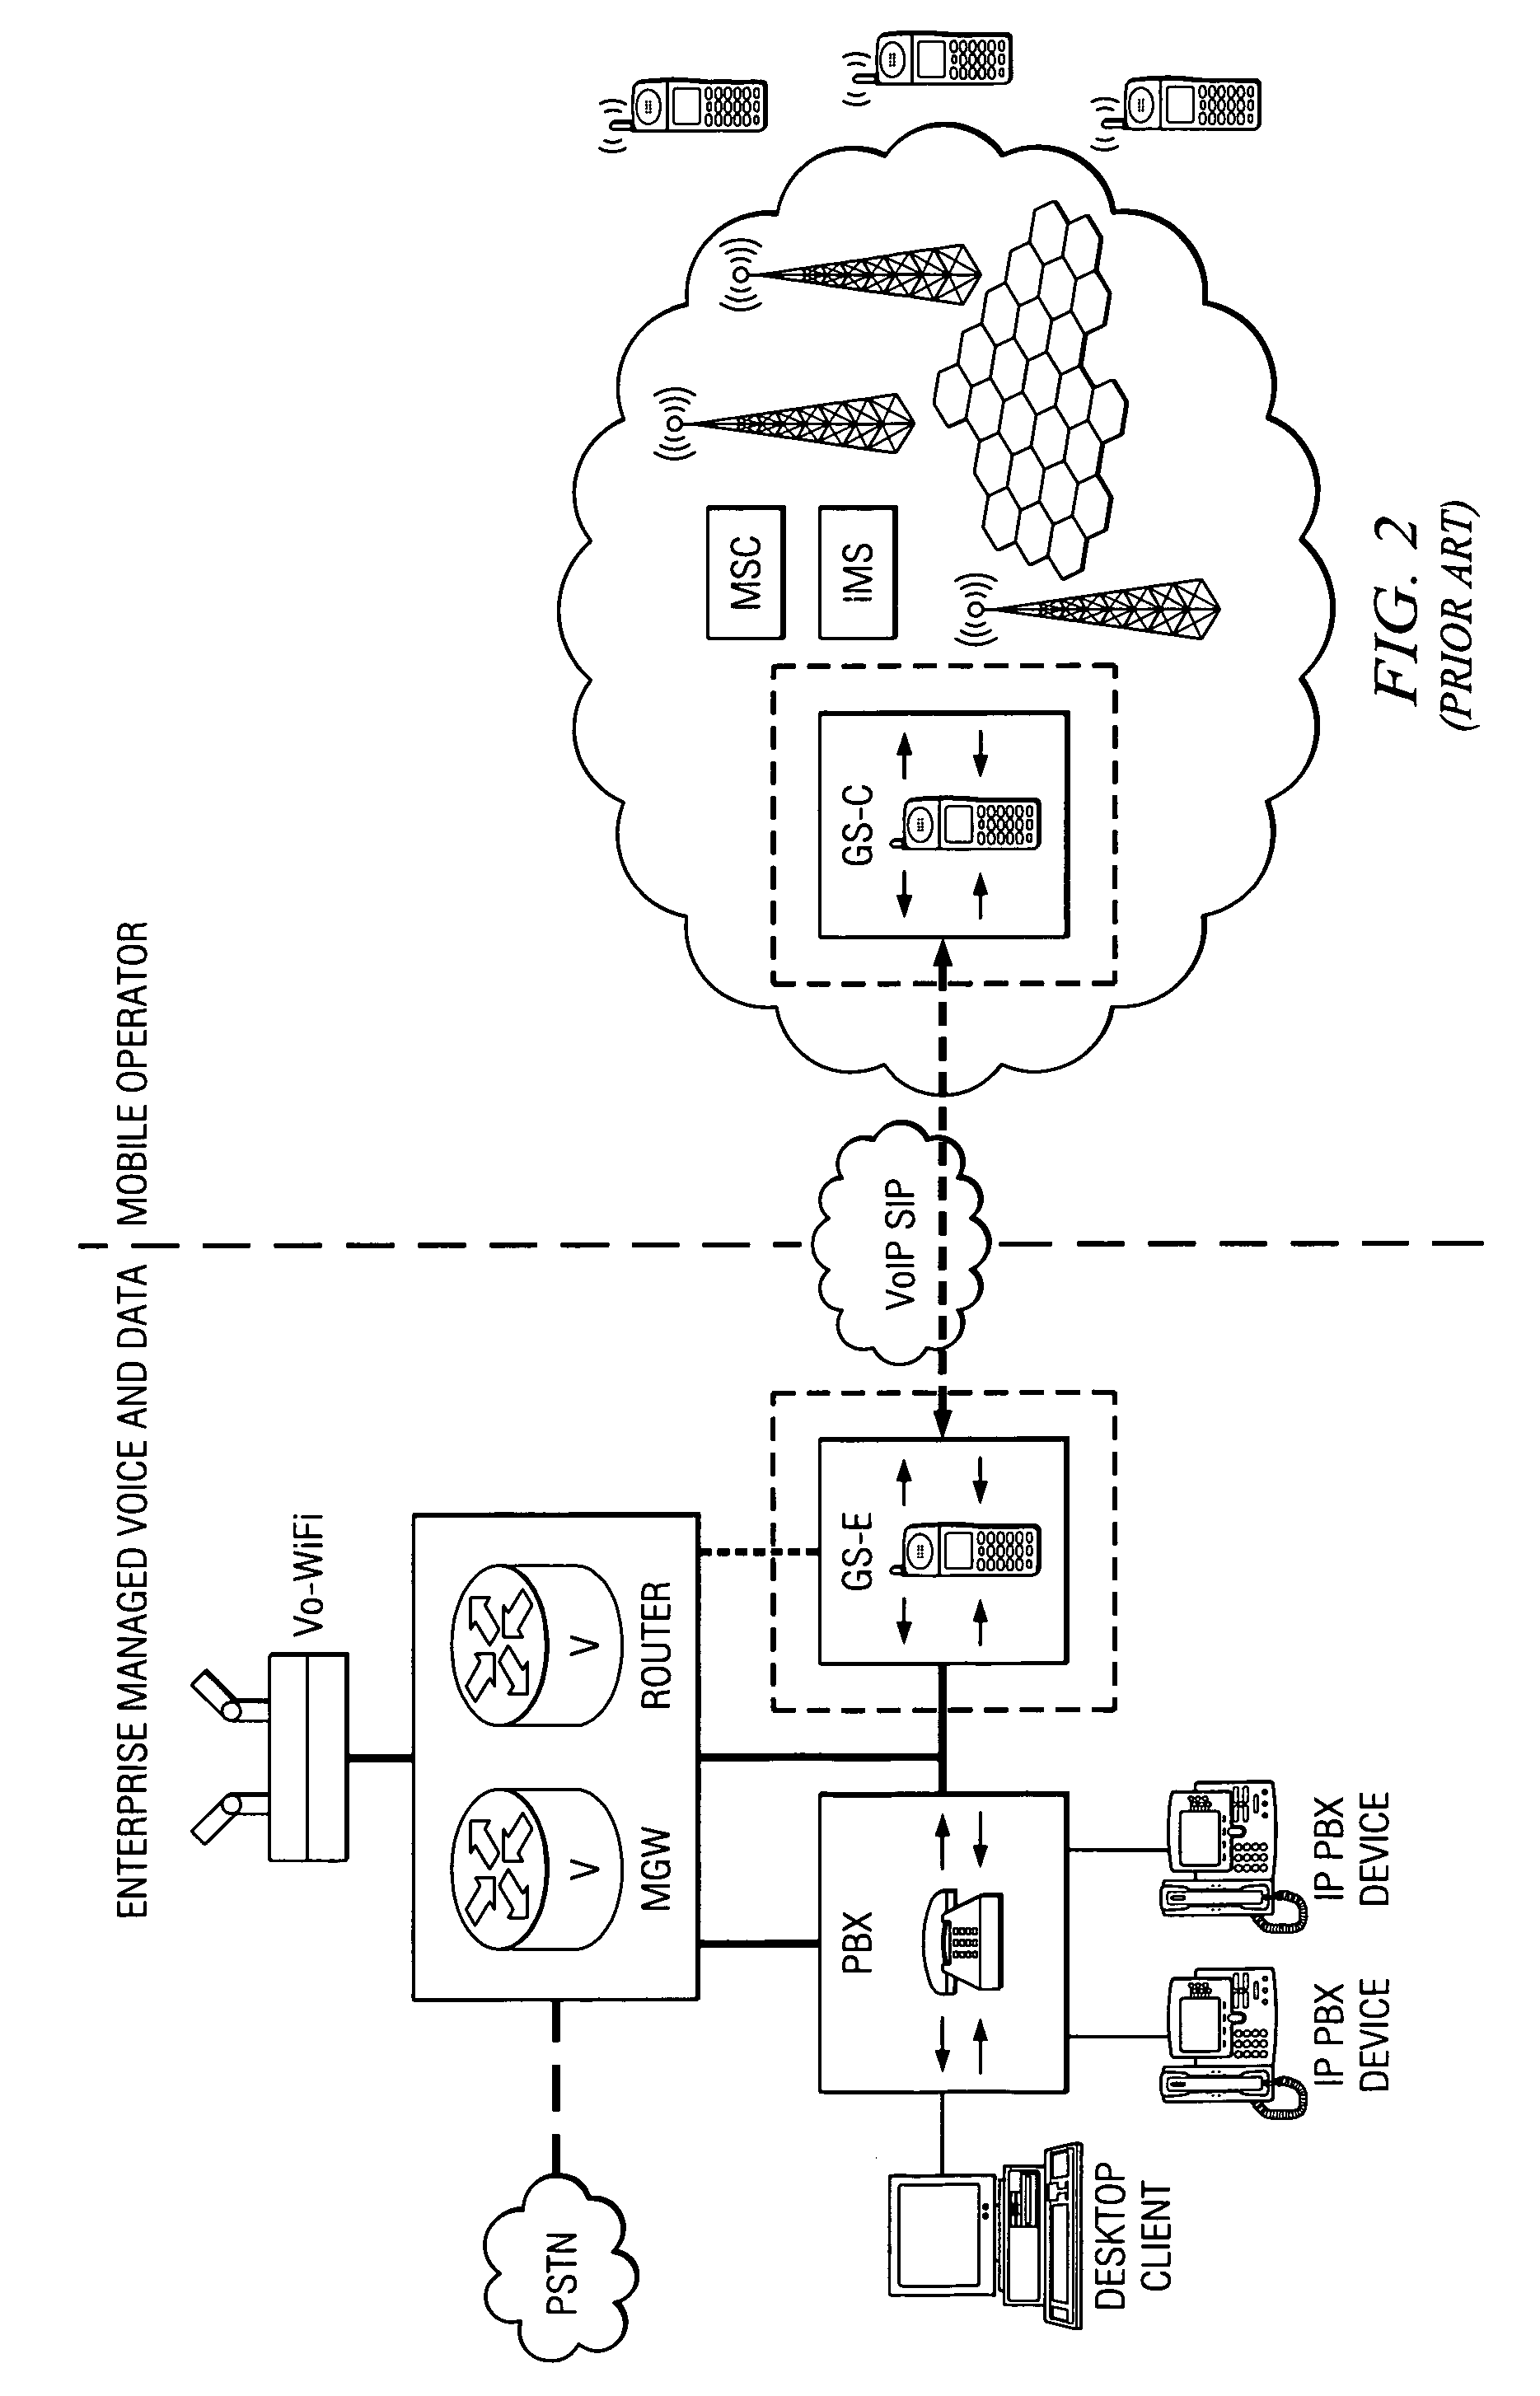 System and method for enabling DTMF detection in a VoIP network